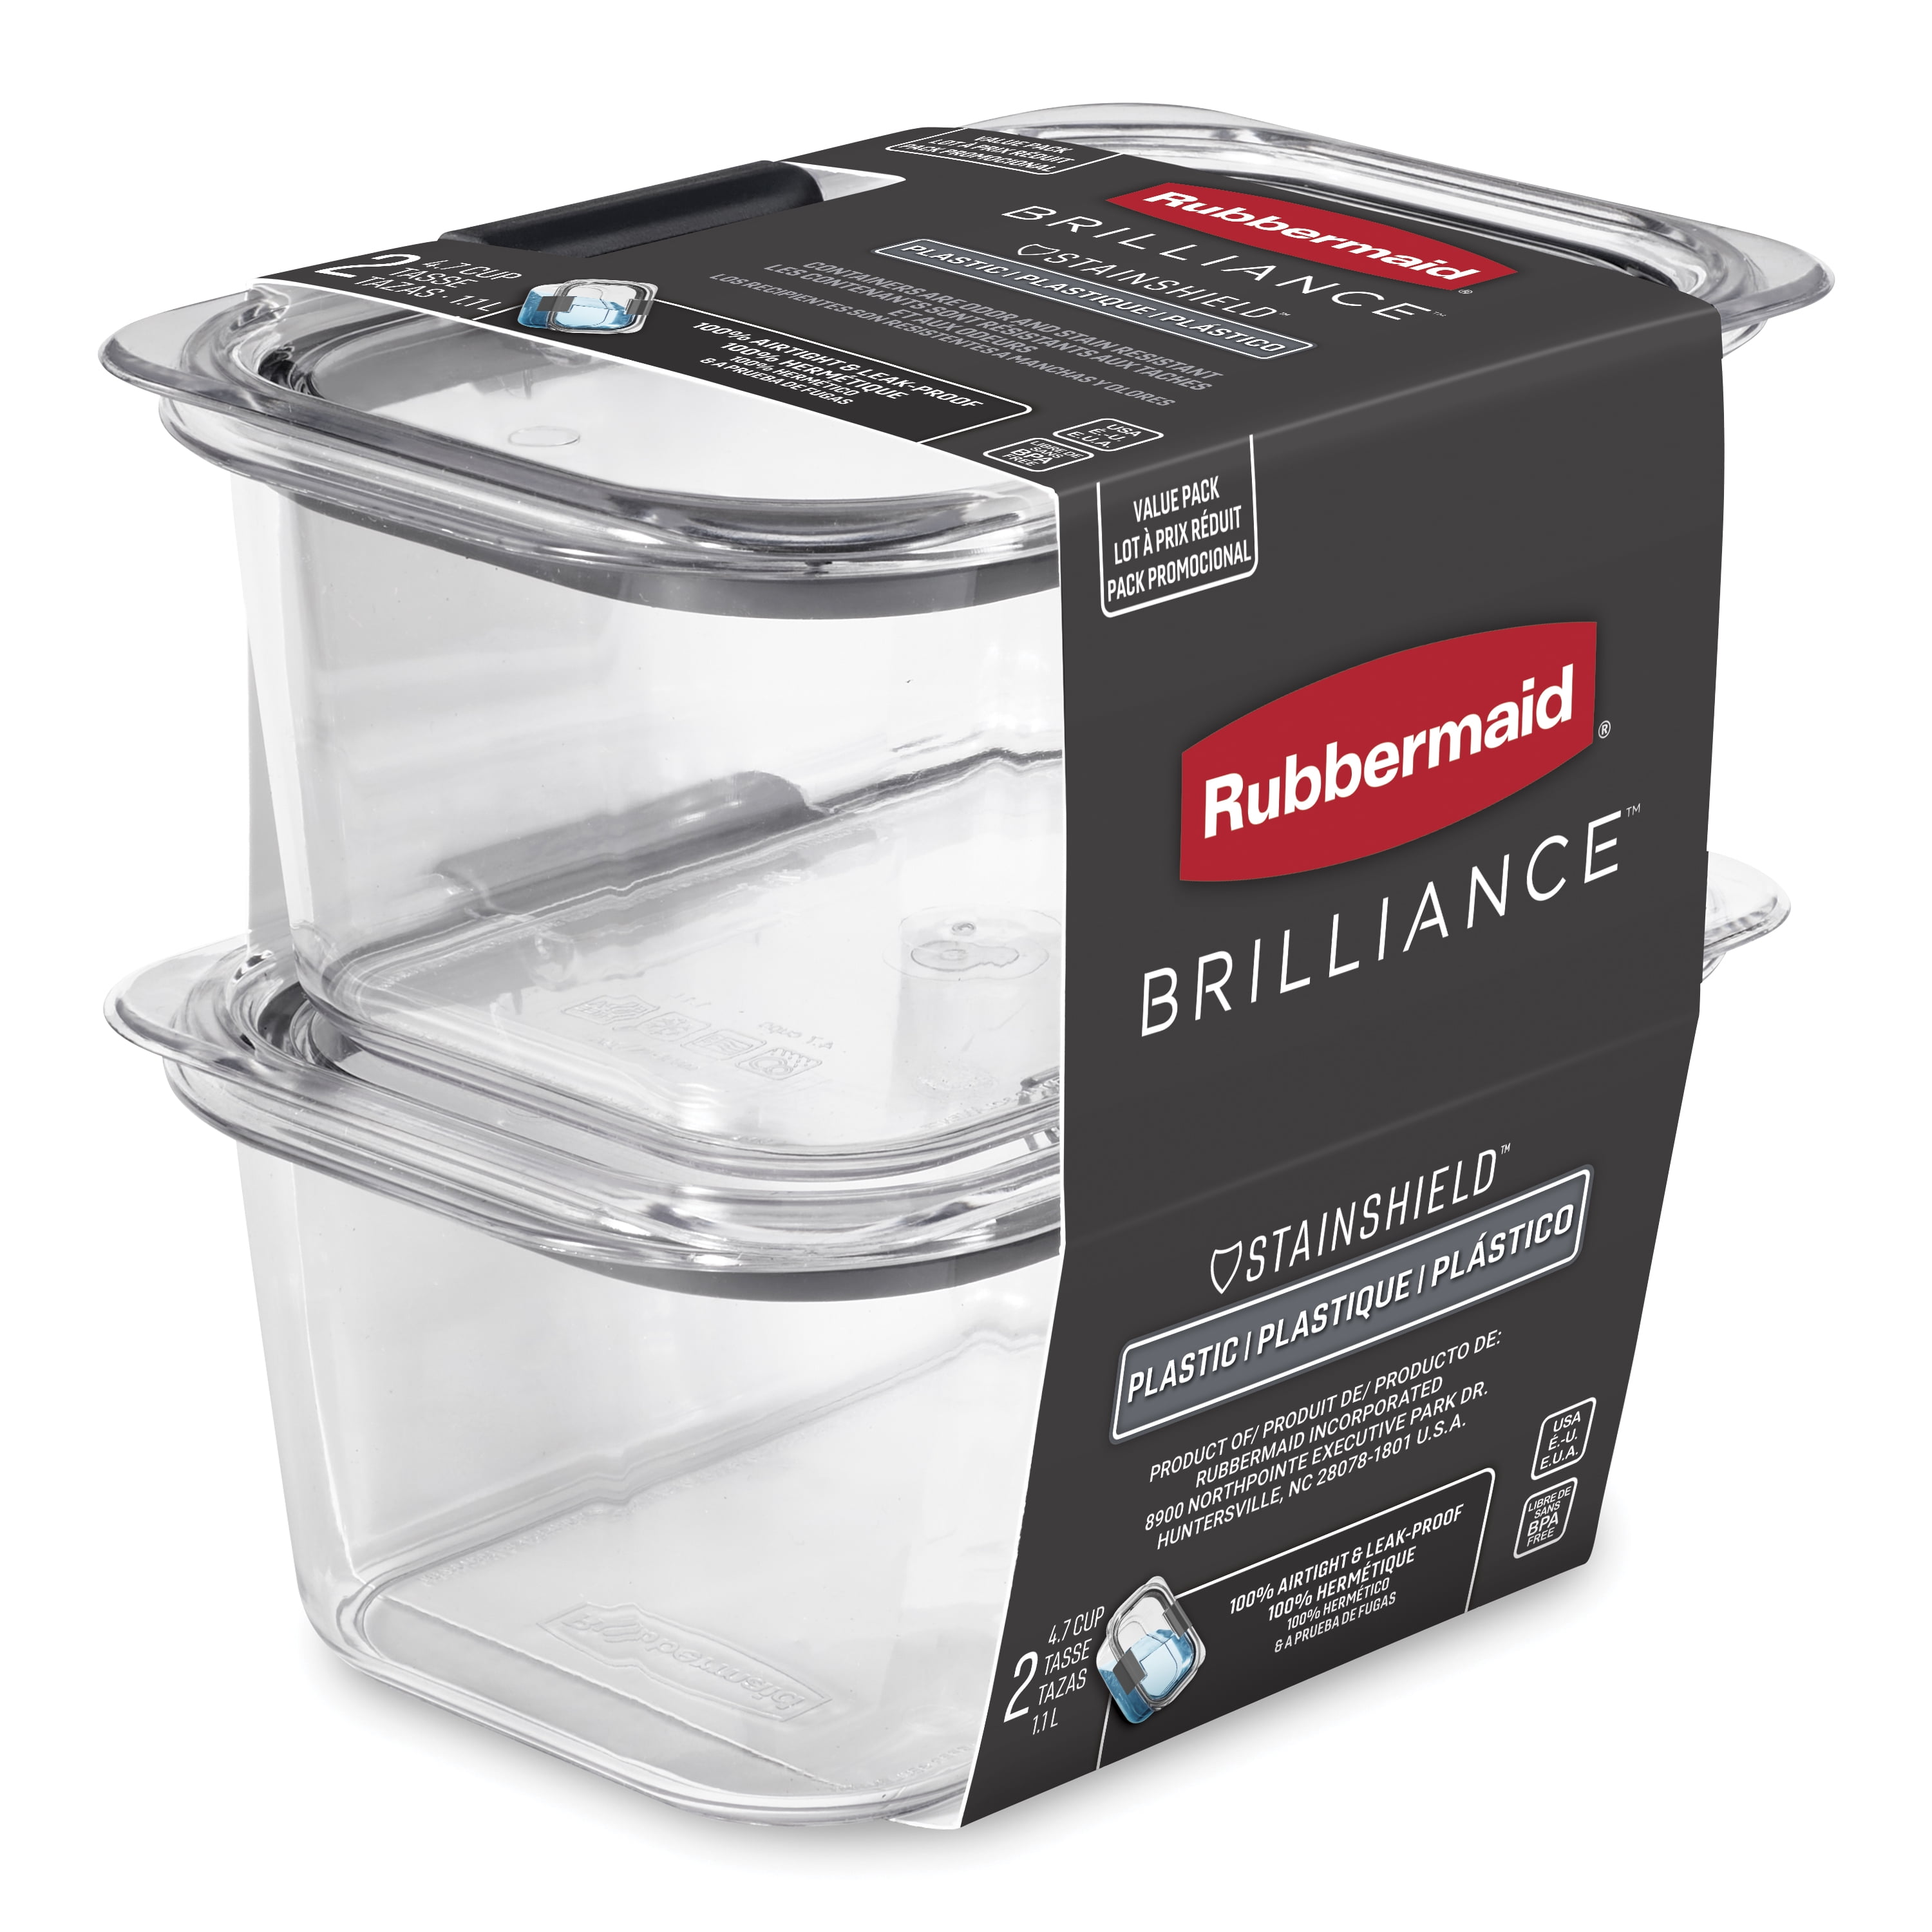  Rubbermaid Brilliance Food Storage Container, Medium Deep, 4.7  Cup, Clear 2024349: Home & Kitchen